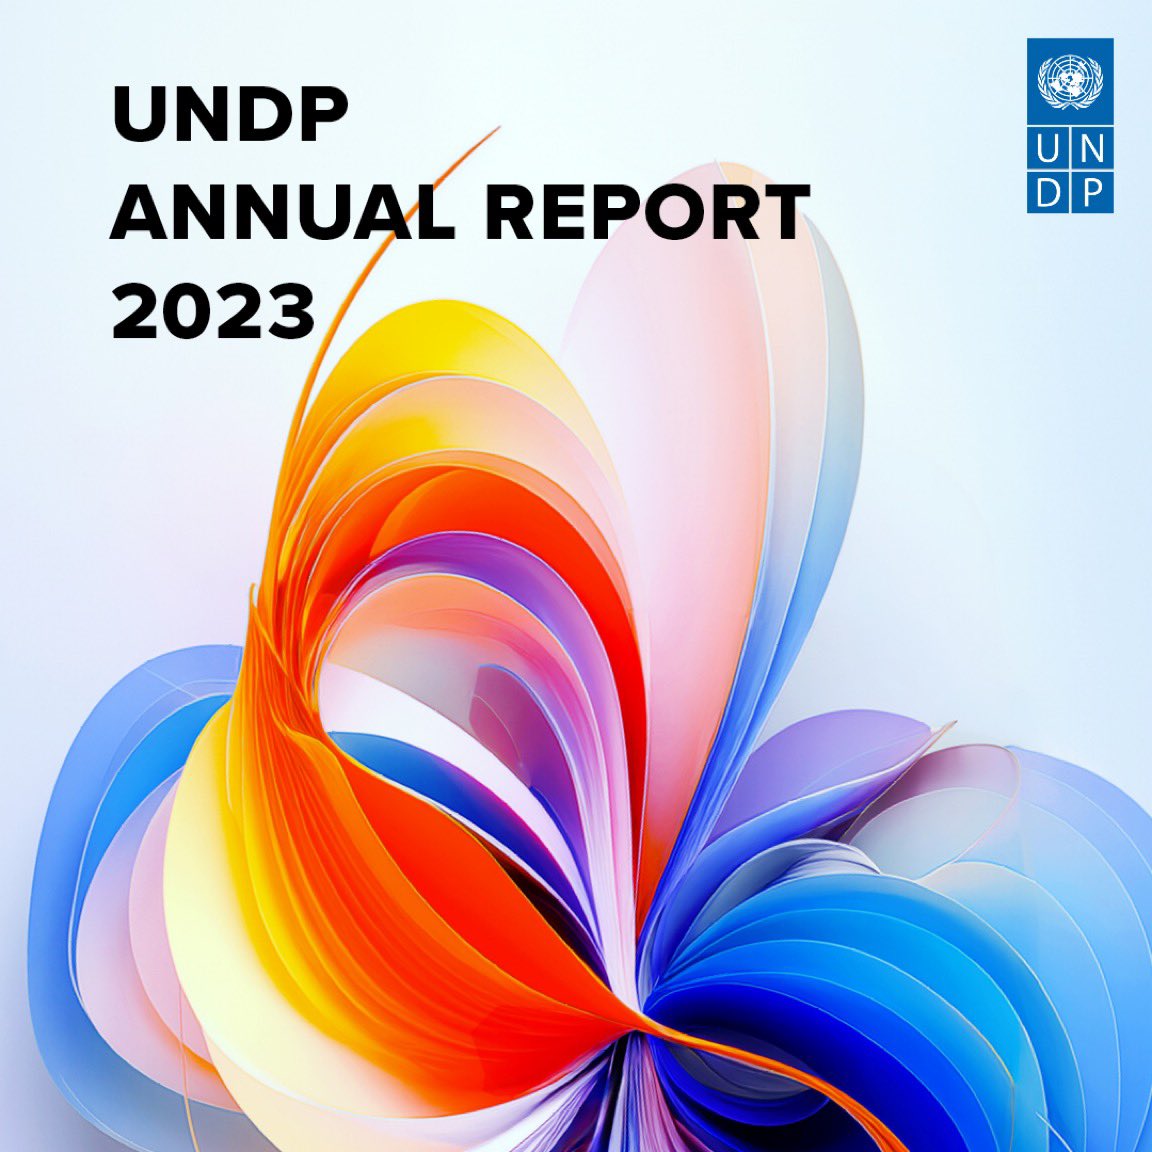 Let’s thrive as one. Let’s make voices count. Let’s invest smarter. Learn more in UNDP’s latest Annual Report 2023: annualreport.undp.org